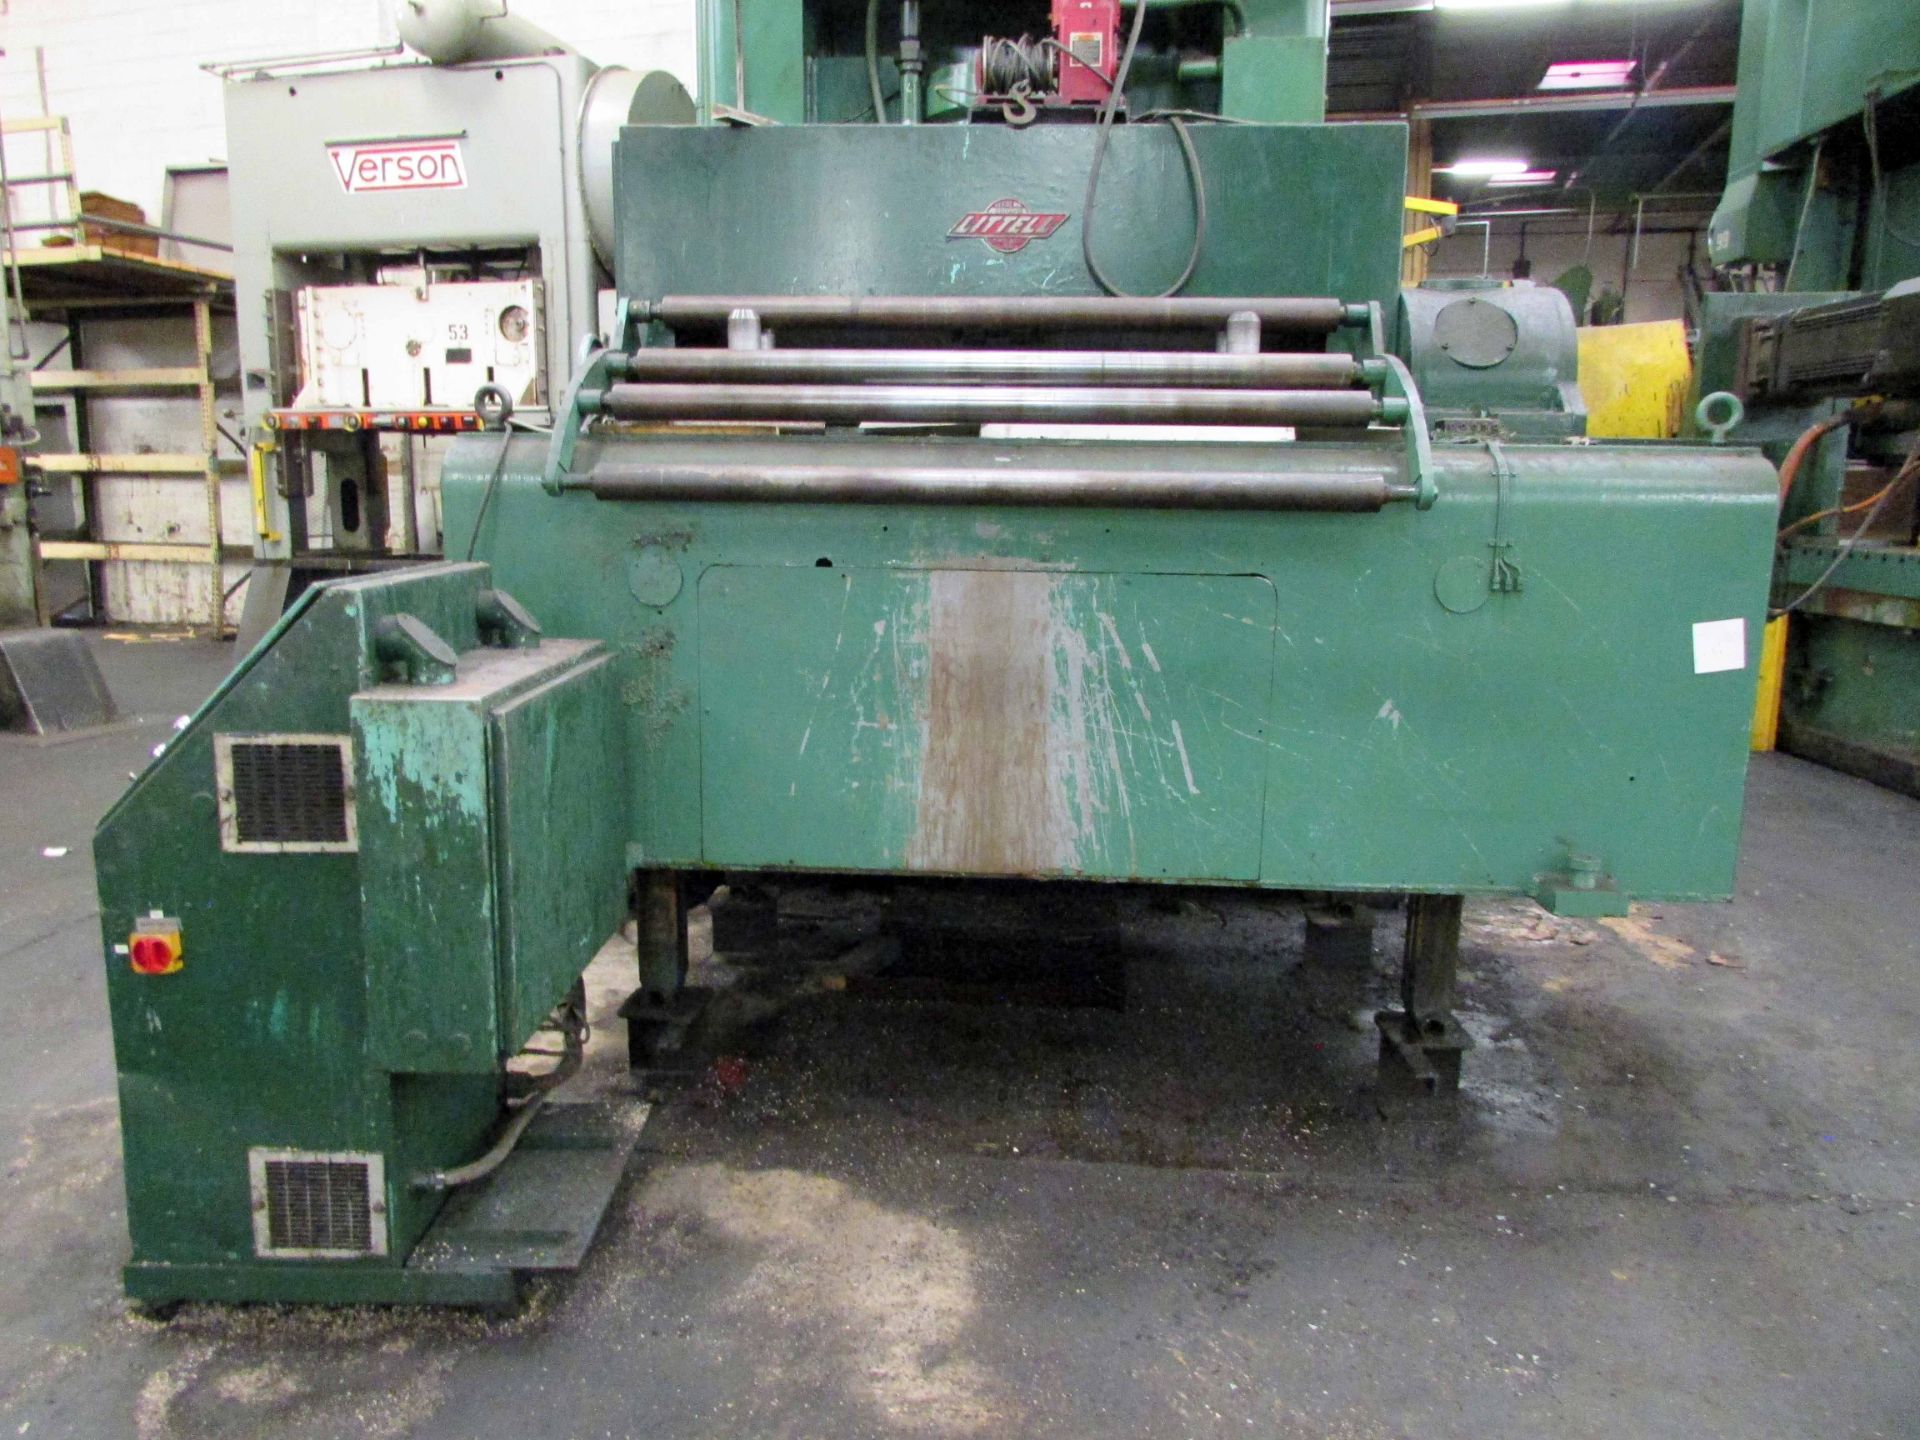 PRESS FEEDER, LITTELL SERVO ROLL FEEDER, 60” max. width, Indramat drive, guide rolls, edge guides, - Image 4 of 8